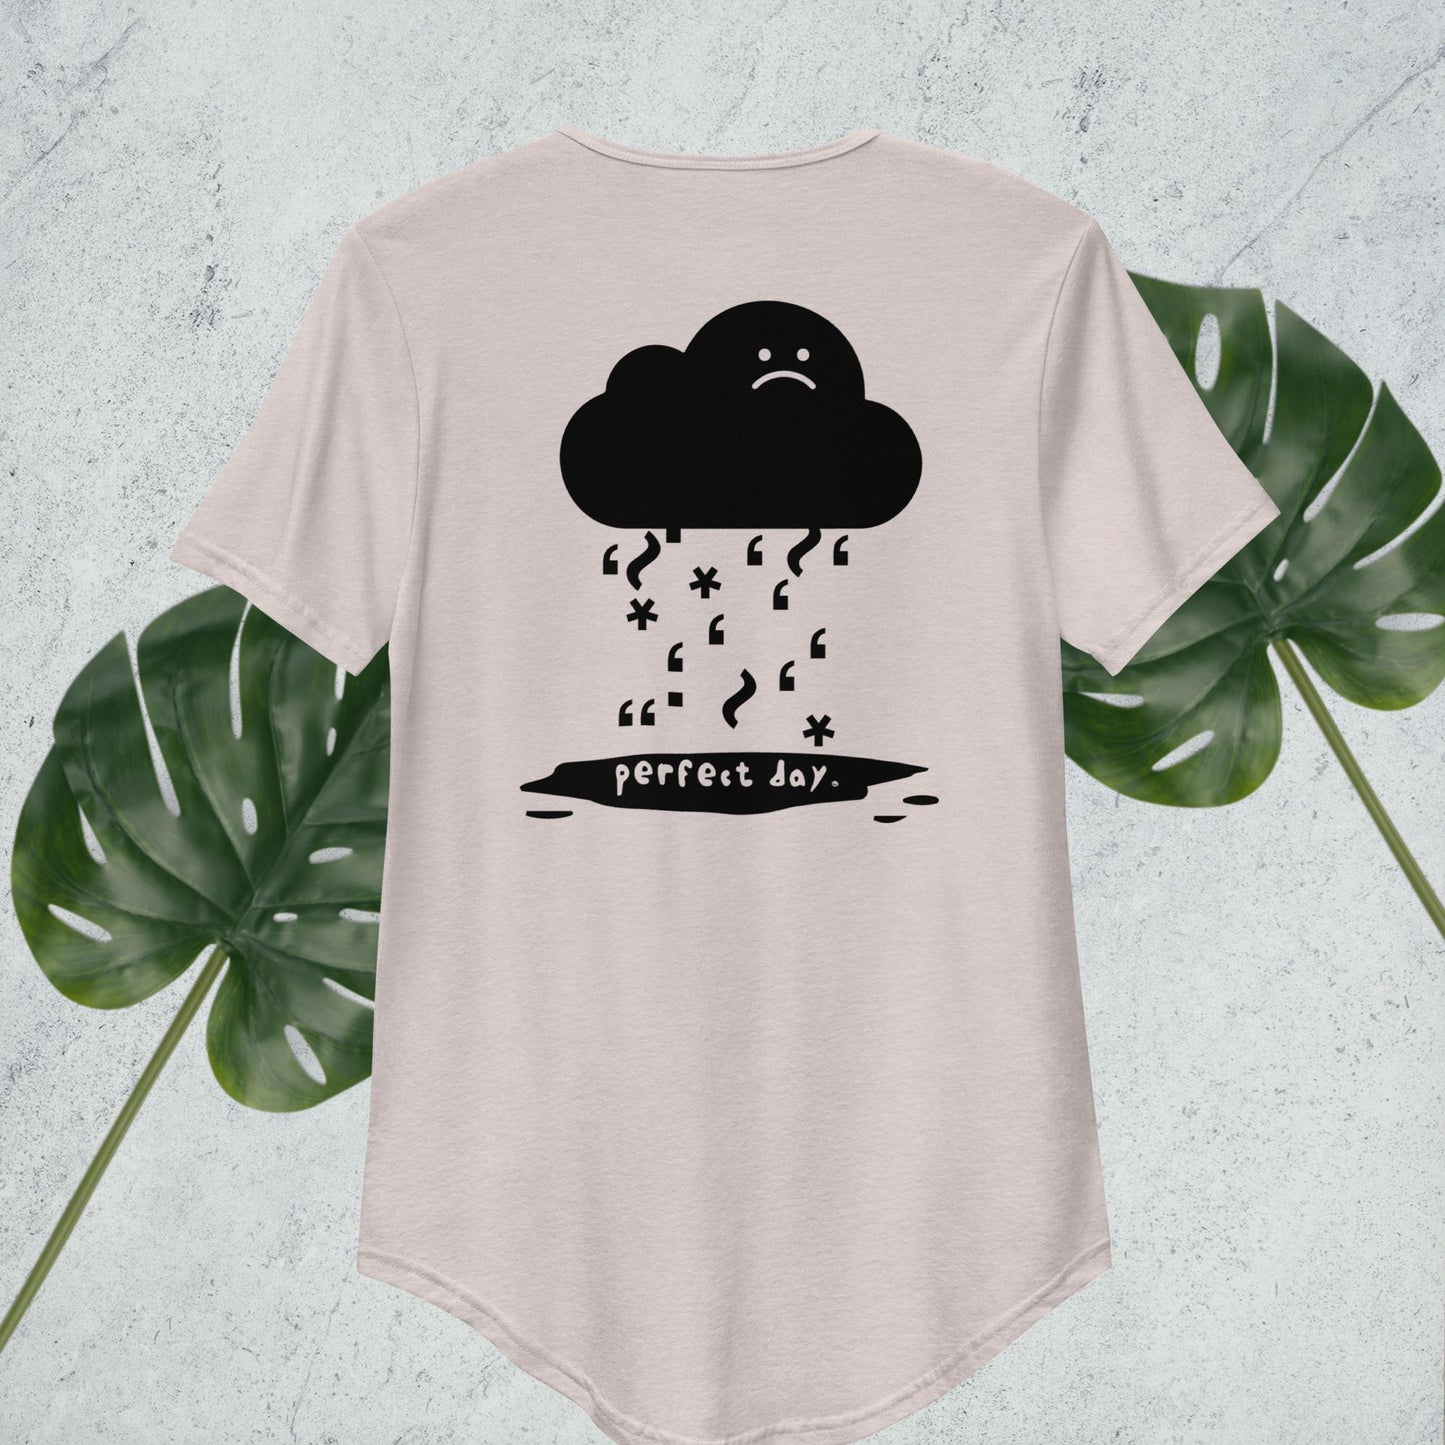 cloudy emotions short sleeve t